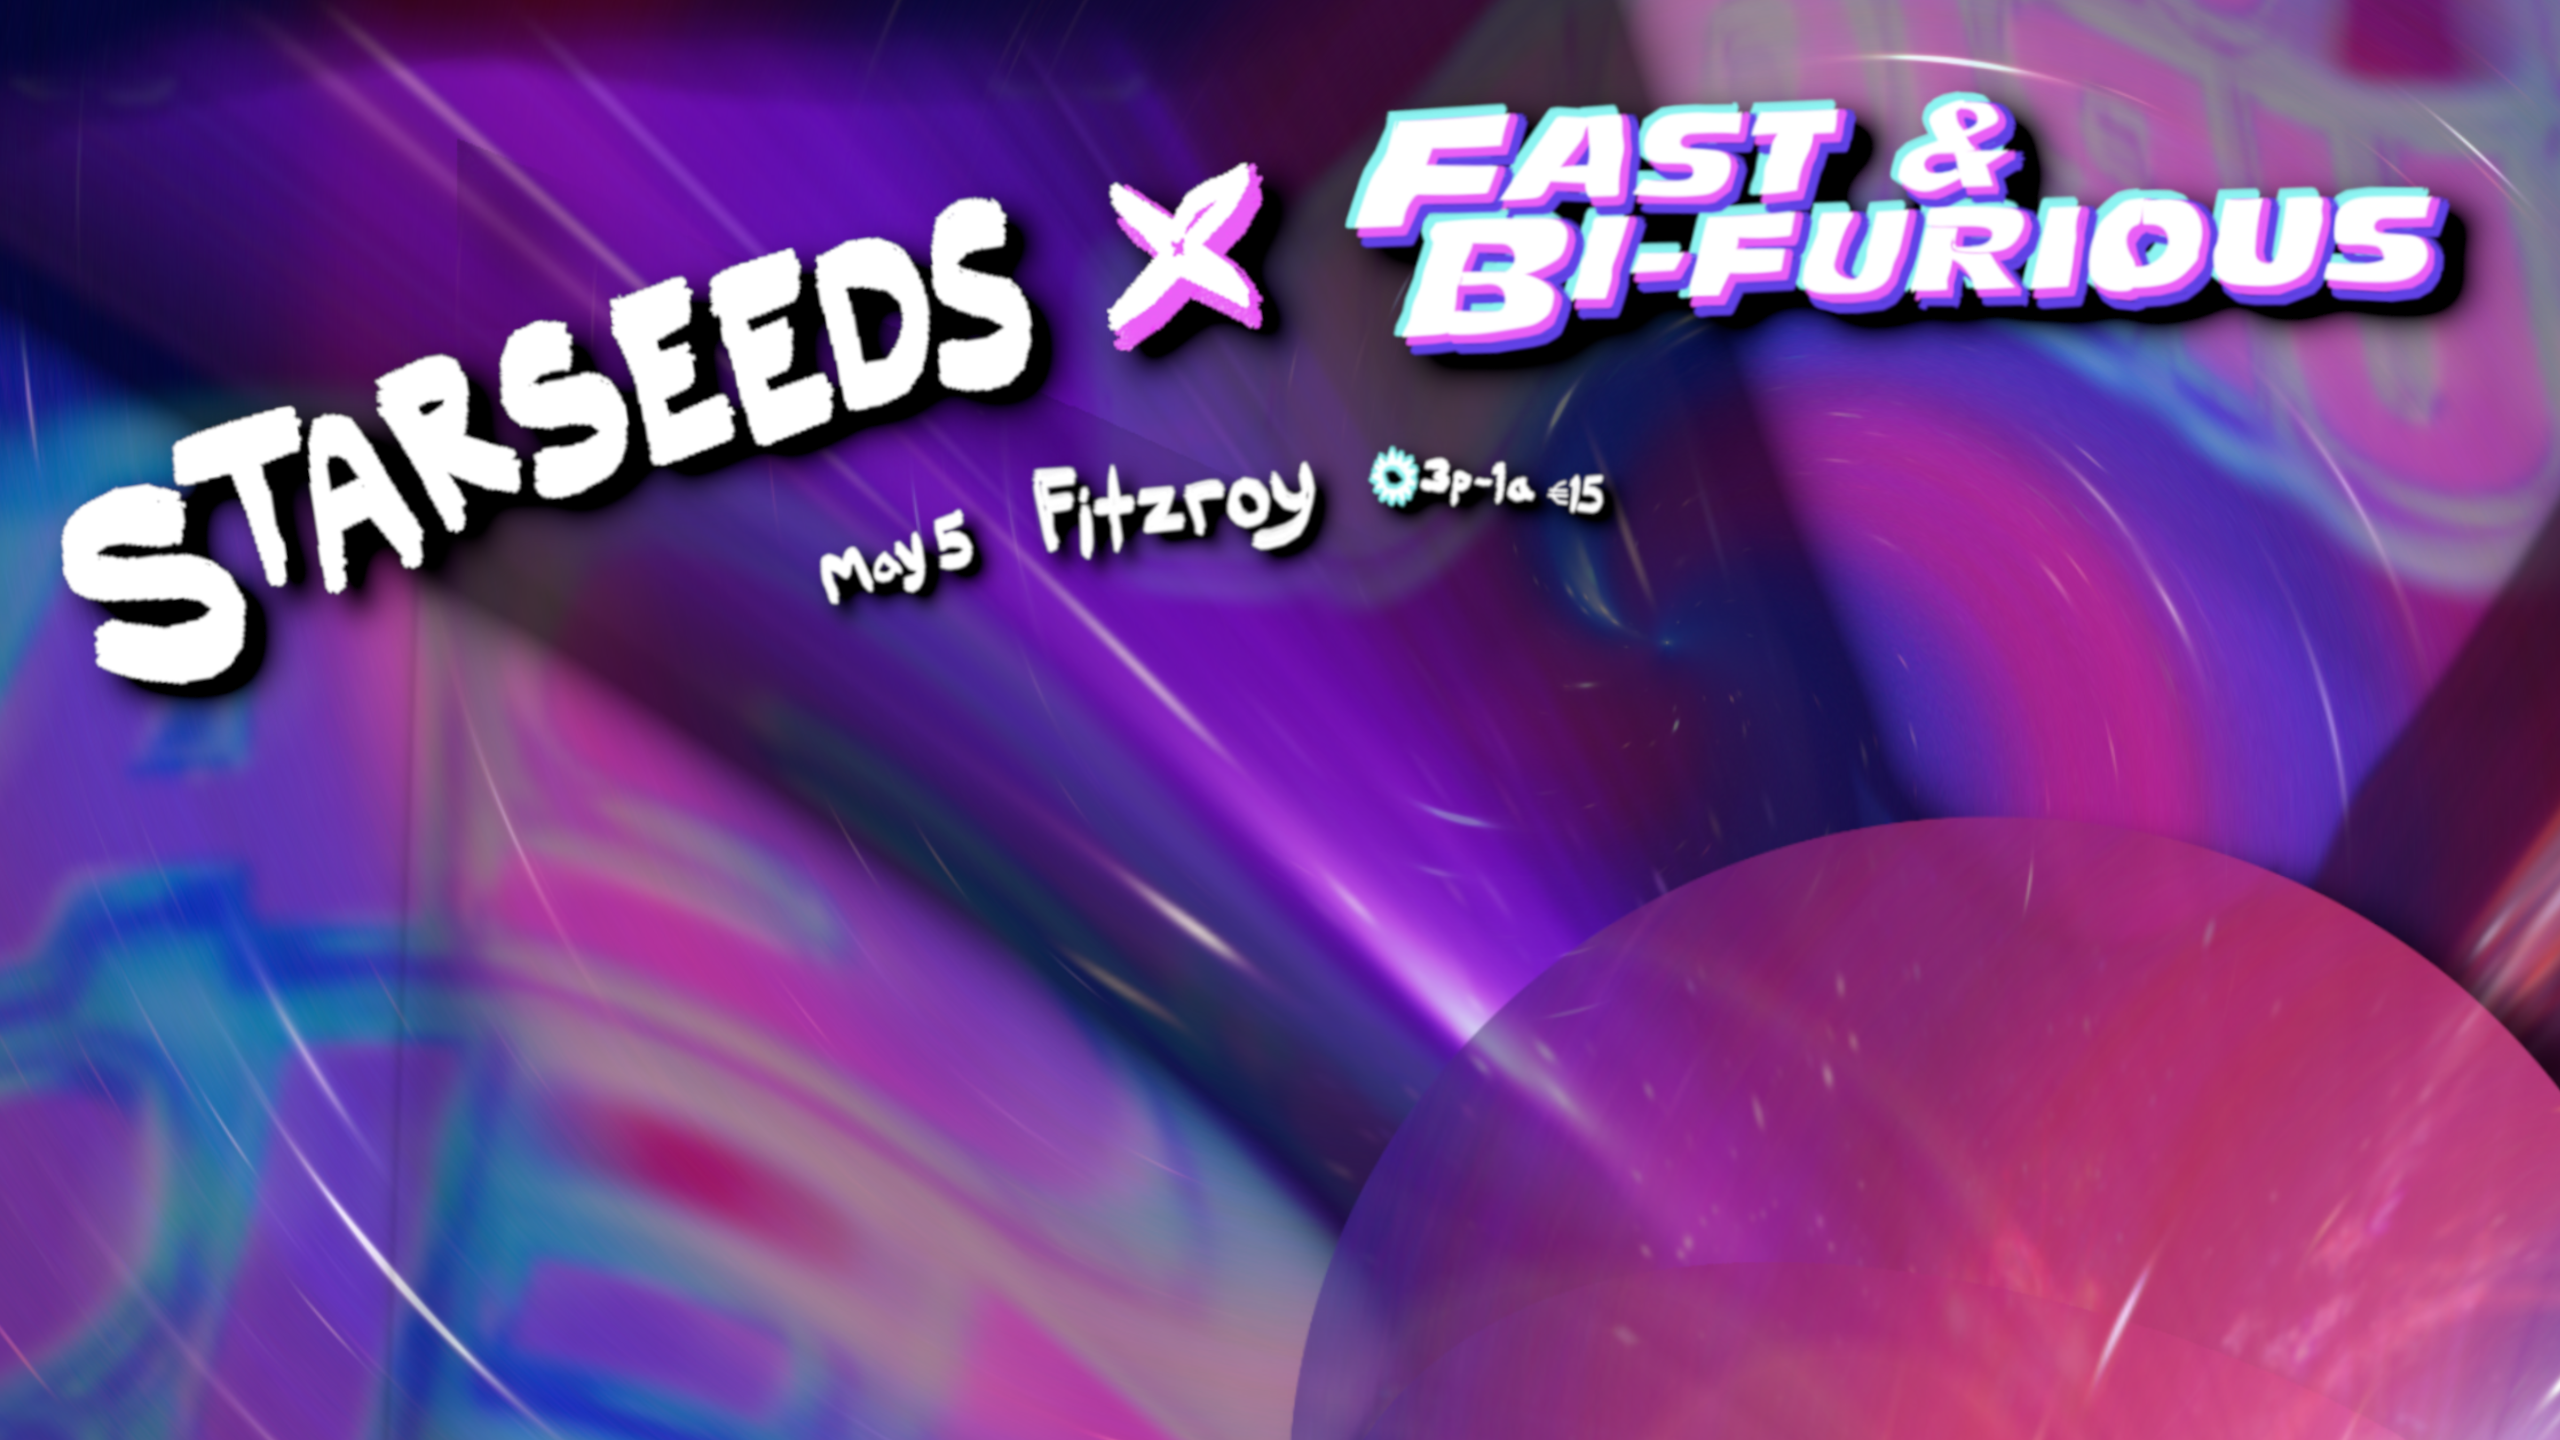 Starseeds x Fast & Bi-Furious with Hanaby, Pjenné - フライヤー表